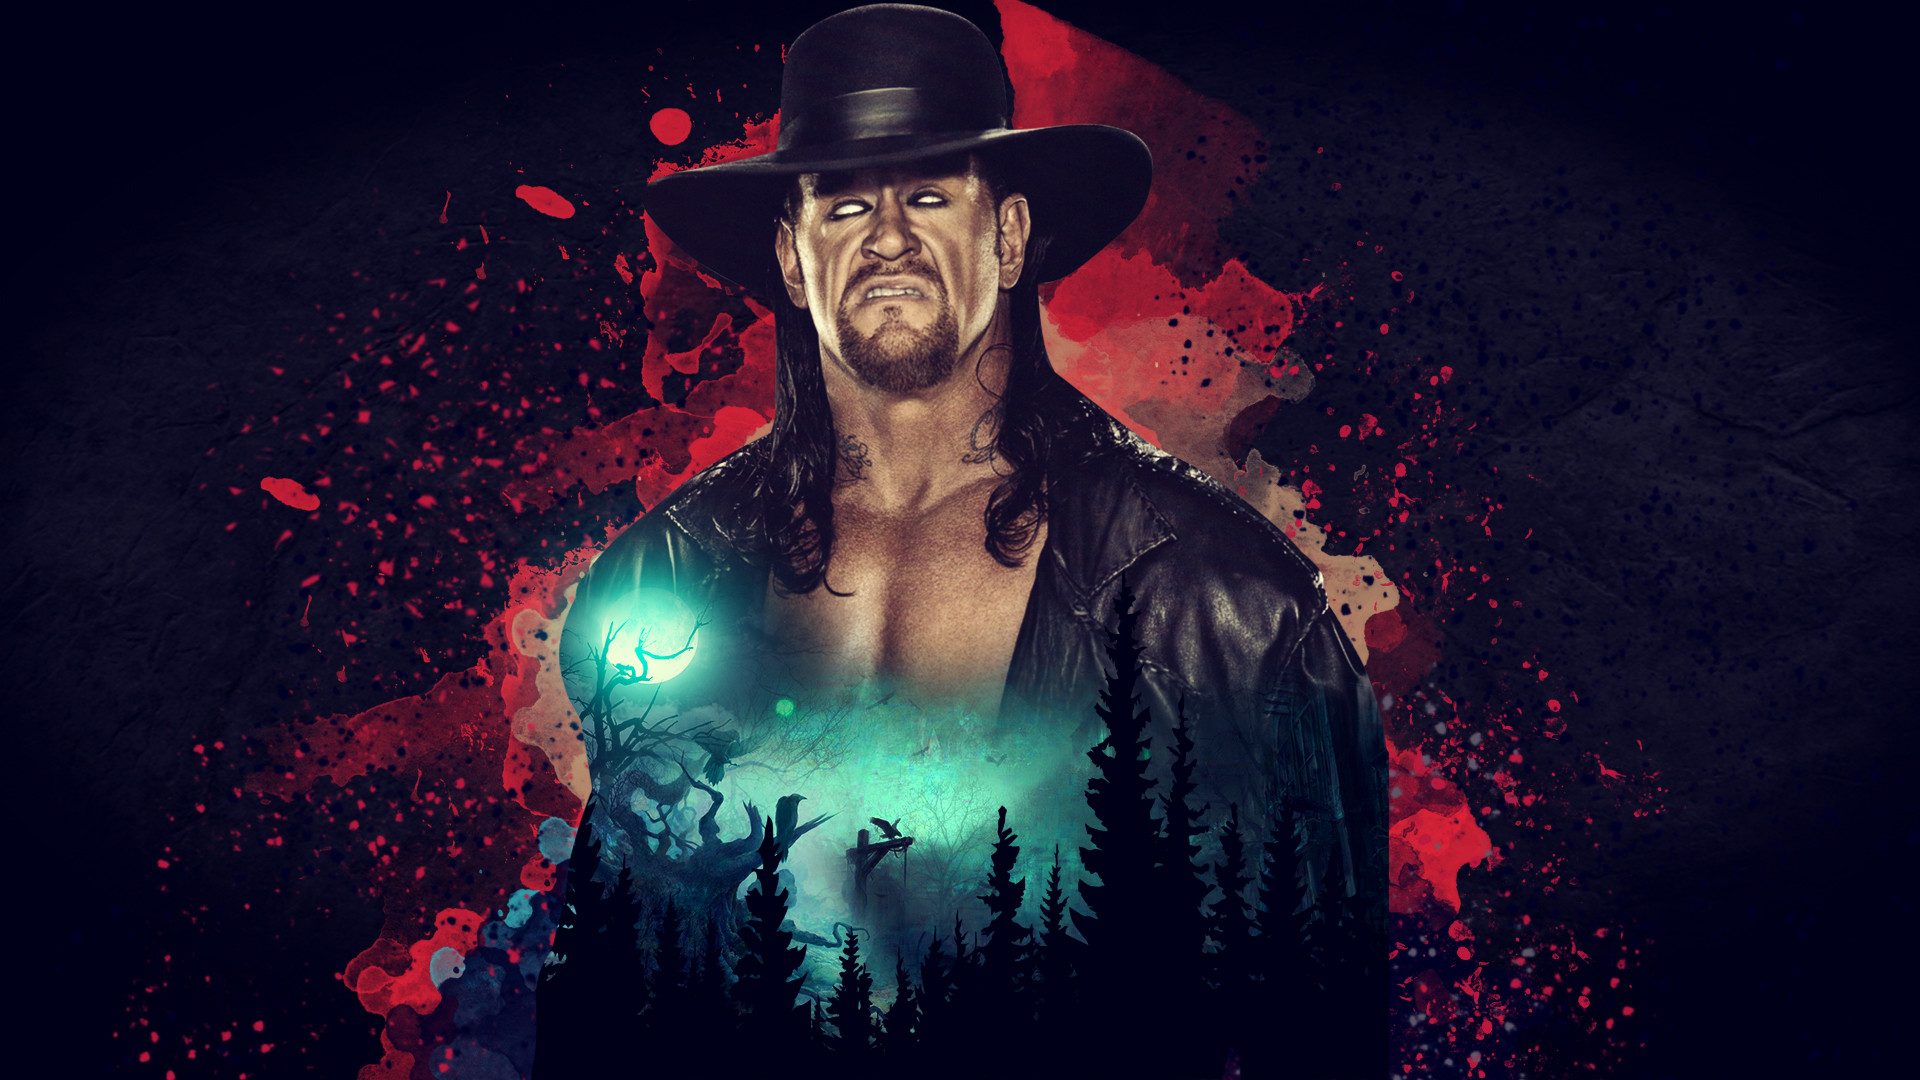 Download Tribute Undertaker Wallpaper by jayp2015  67  Free on ZEDGE  now Browse millions of popular the undertaker Wallpapers and Ringto   アンダーテイカー イラスト レスラー